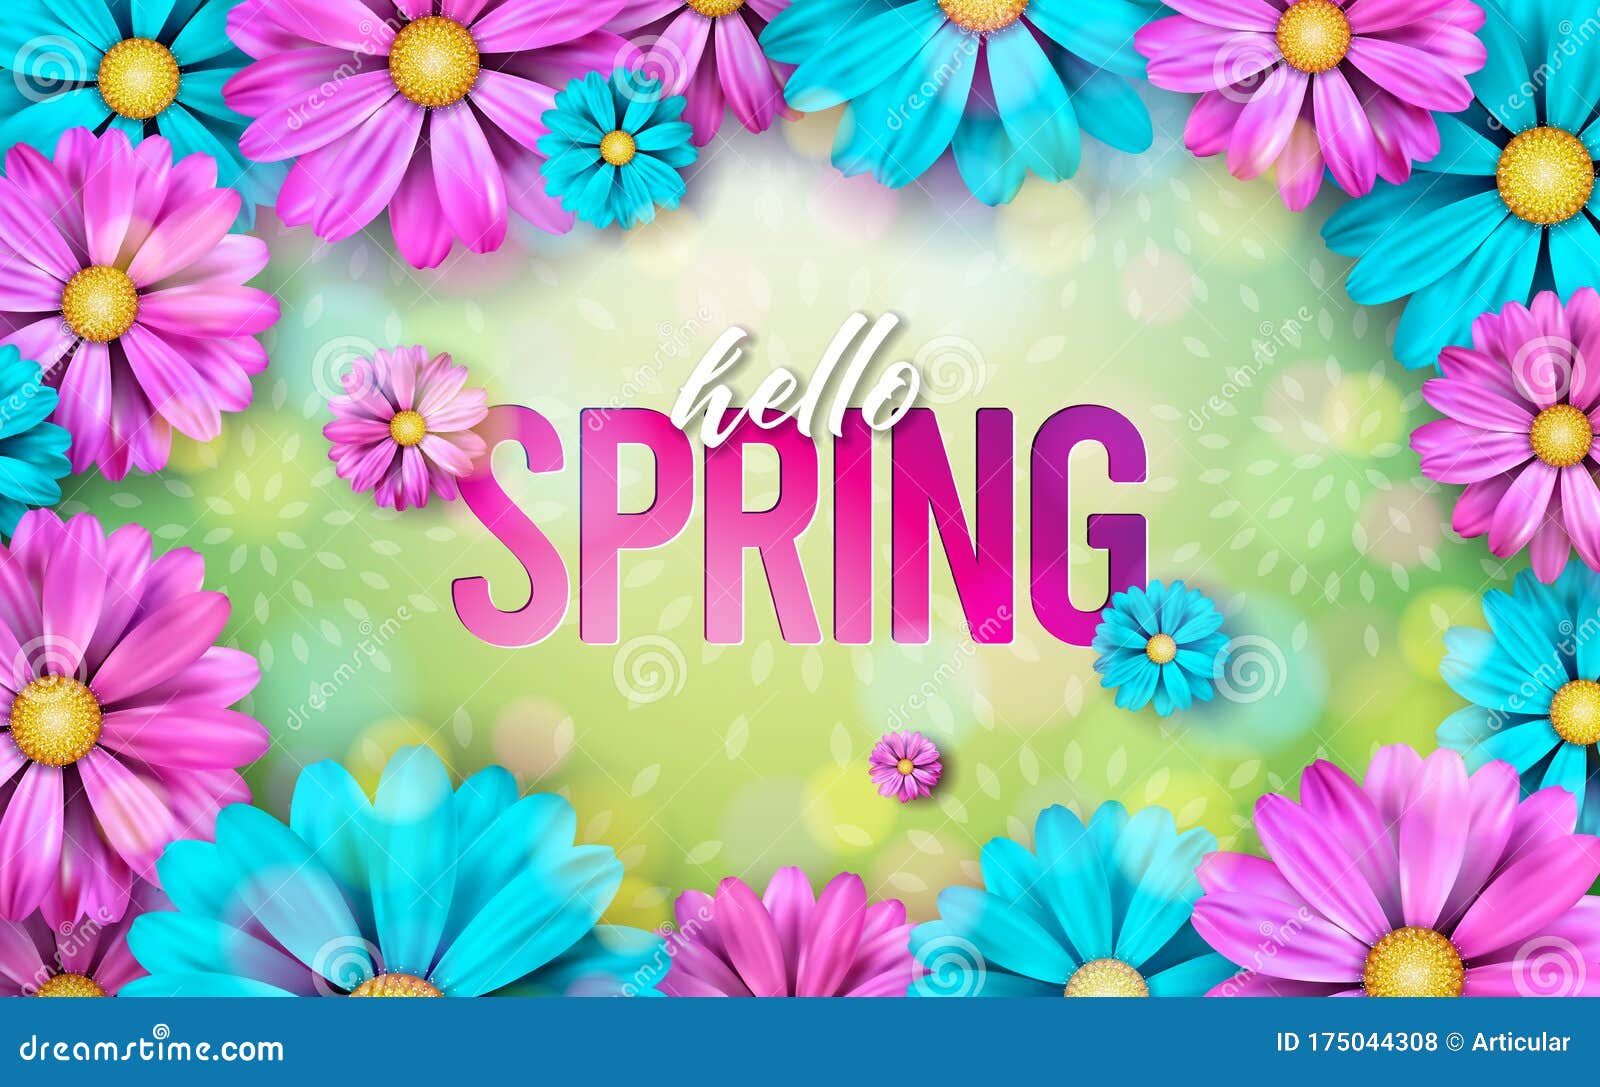 Vector Illustration on a Spring Nature Theme with Beautiful Colorful Flower  on Green Background. Floral Design Template Stock Vector - Illustration of  grass, flower: 175044308